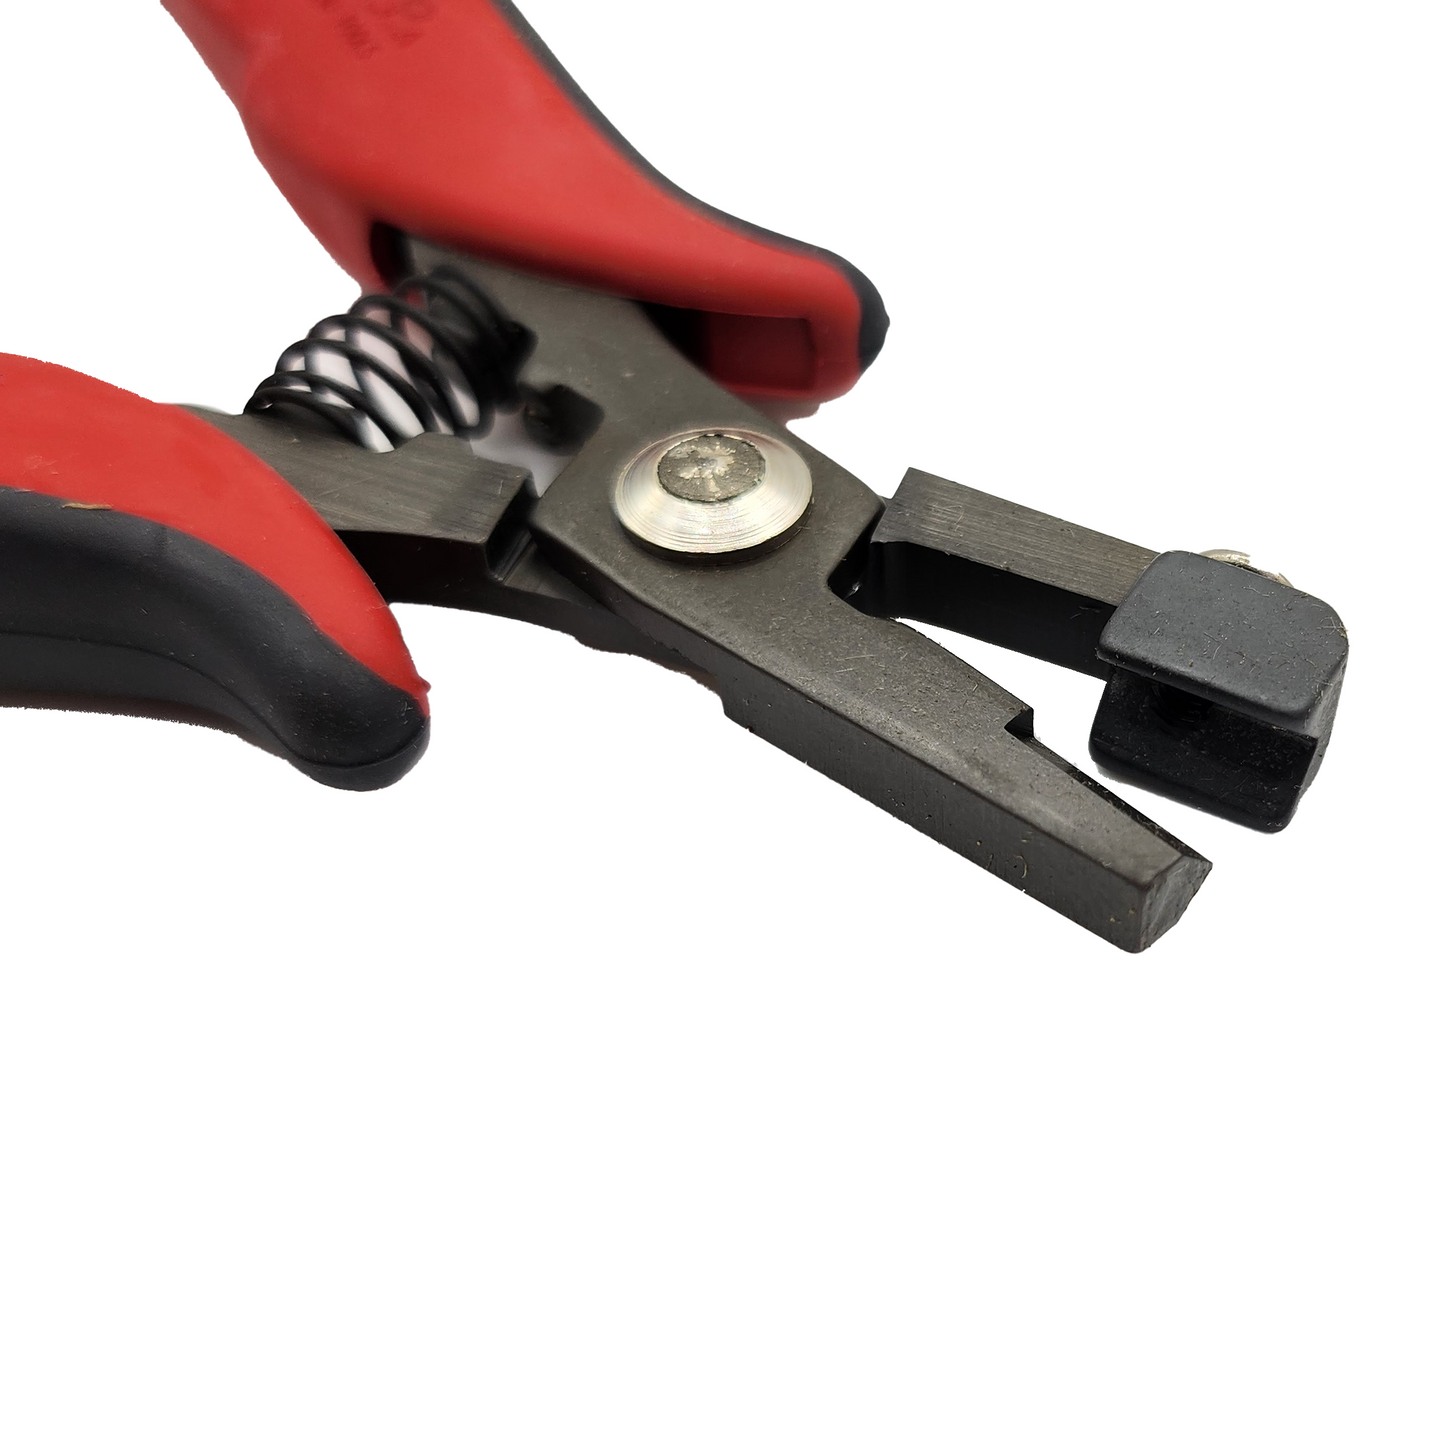 Hakko Products_ CHP PN-5040 Lead Forming Tool_ Cutters, Pliers, Multi-Tools_ Hakko Products